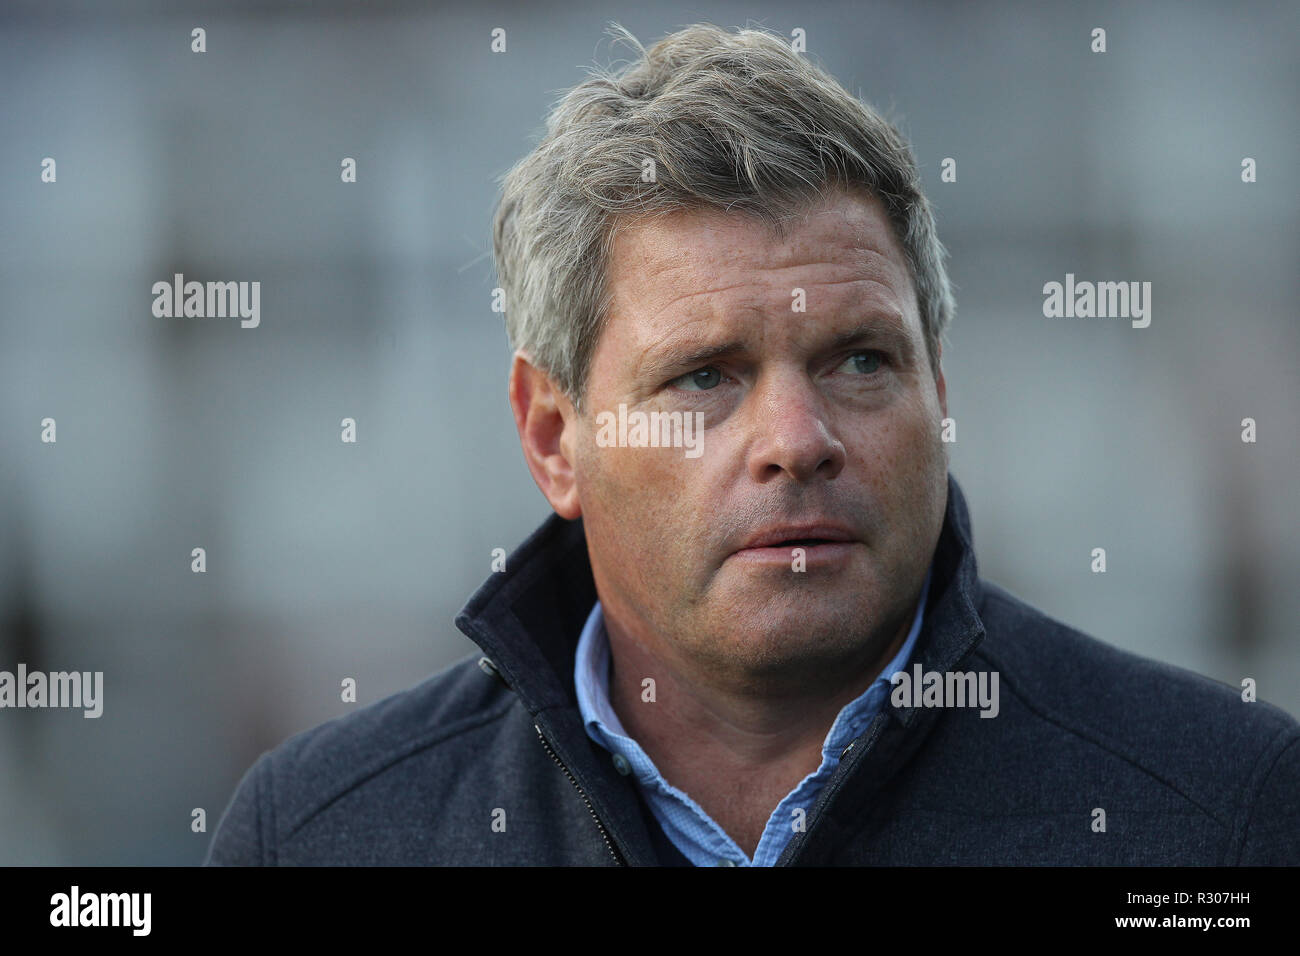 NEWCASTLE UPON TYNE. 28th October 2018  TV presenter Mark Durden Smith during the Premiership Cup match between Newcastle Falcons and Exeter Chiefs at Kingston Park, Newcastle on Sunday 28th October 2018. ©MI News & Sport Ltd  | Alamy Live News Stock Photo